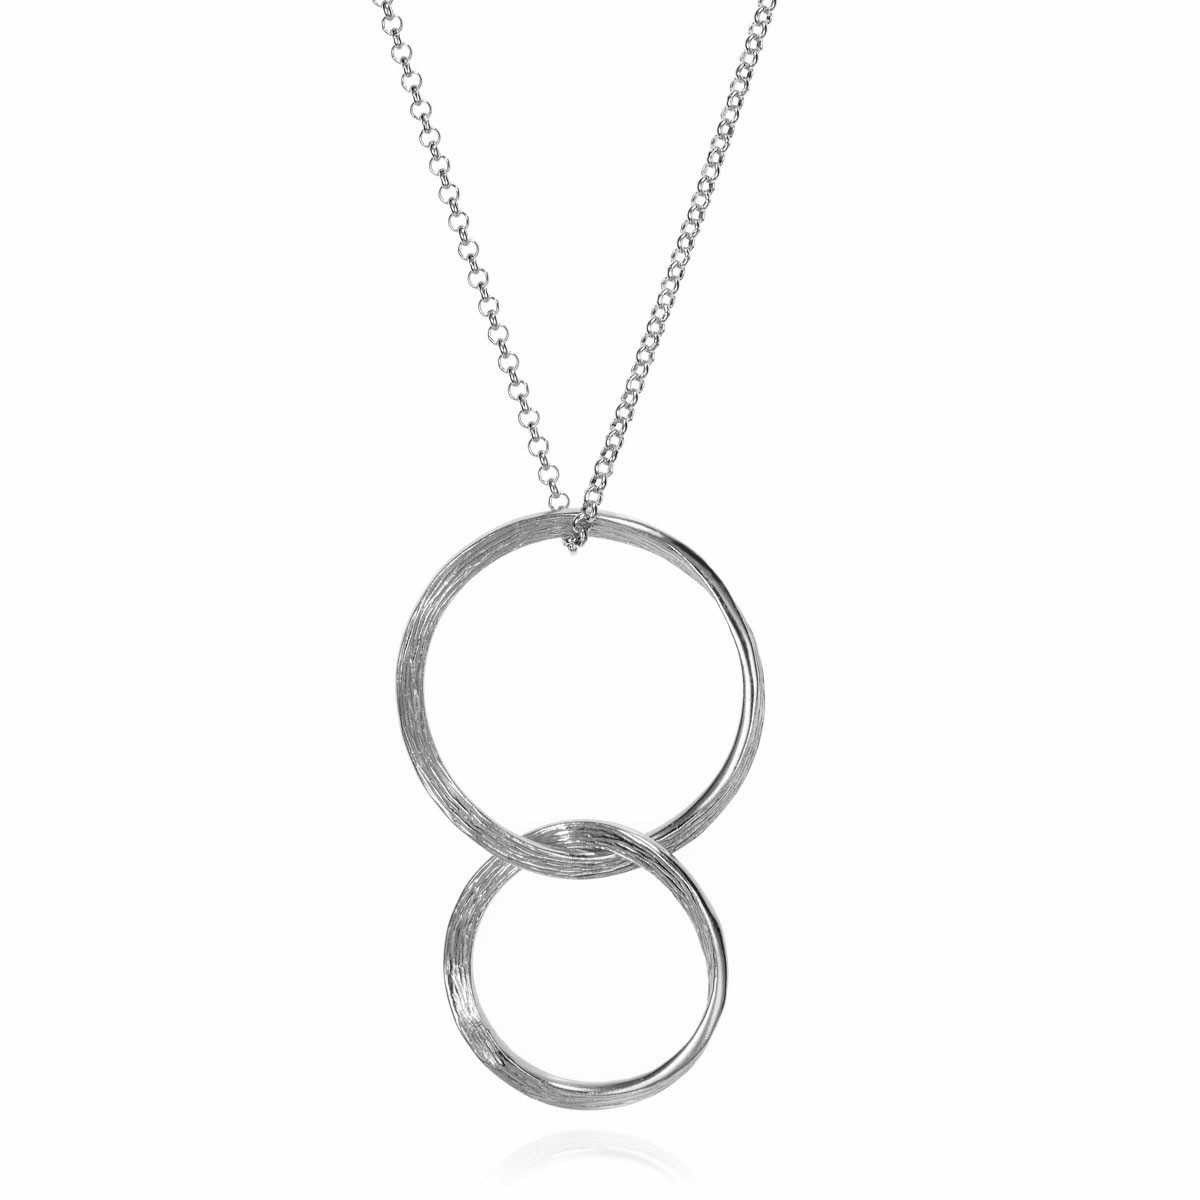 FLORENCE Pendant in Silver.